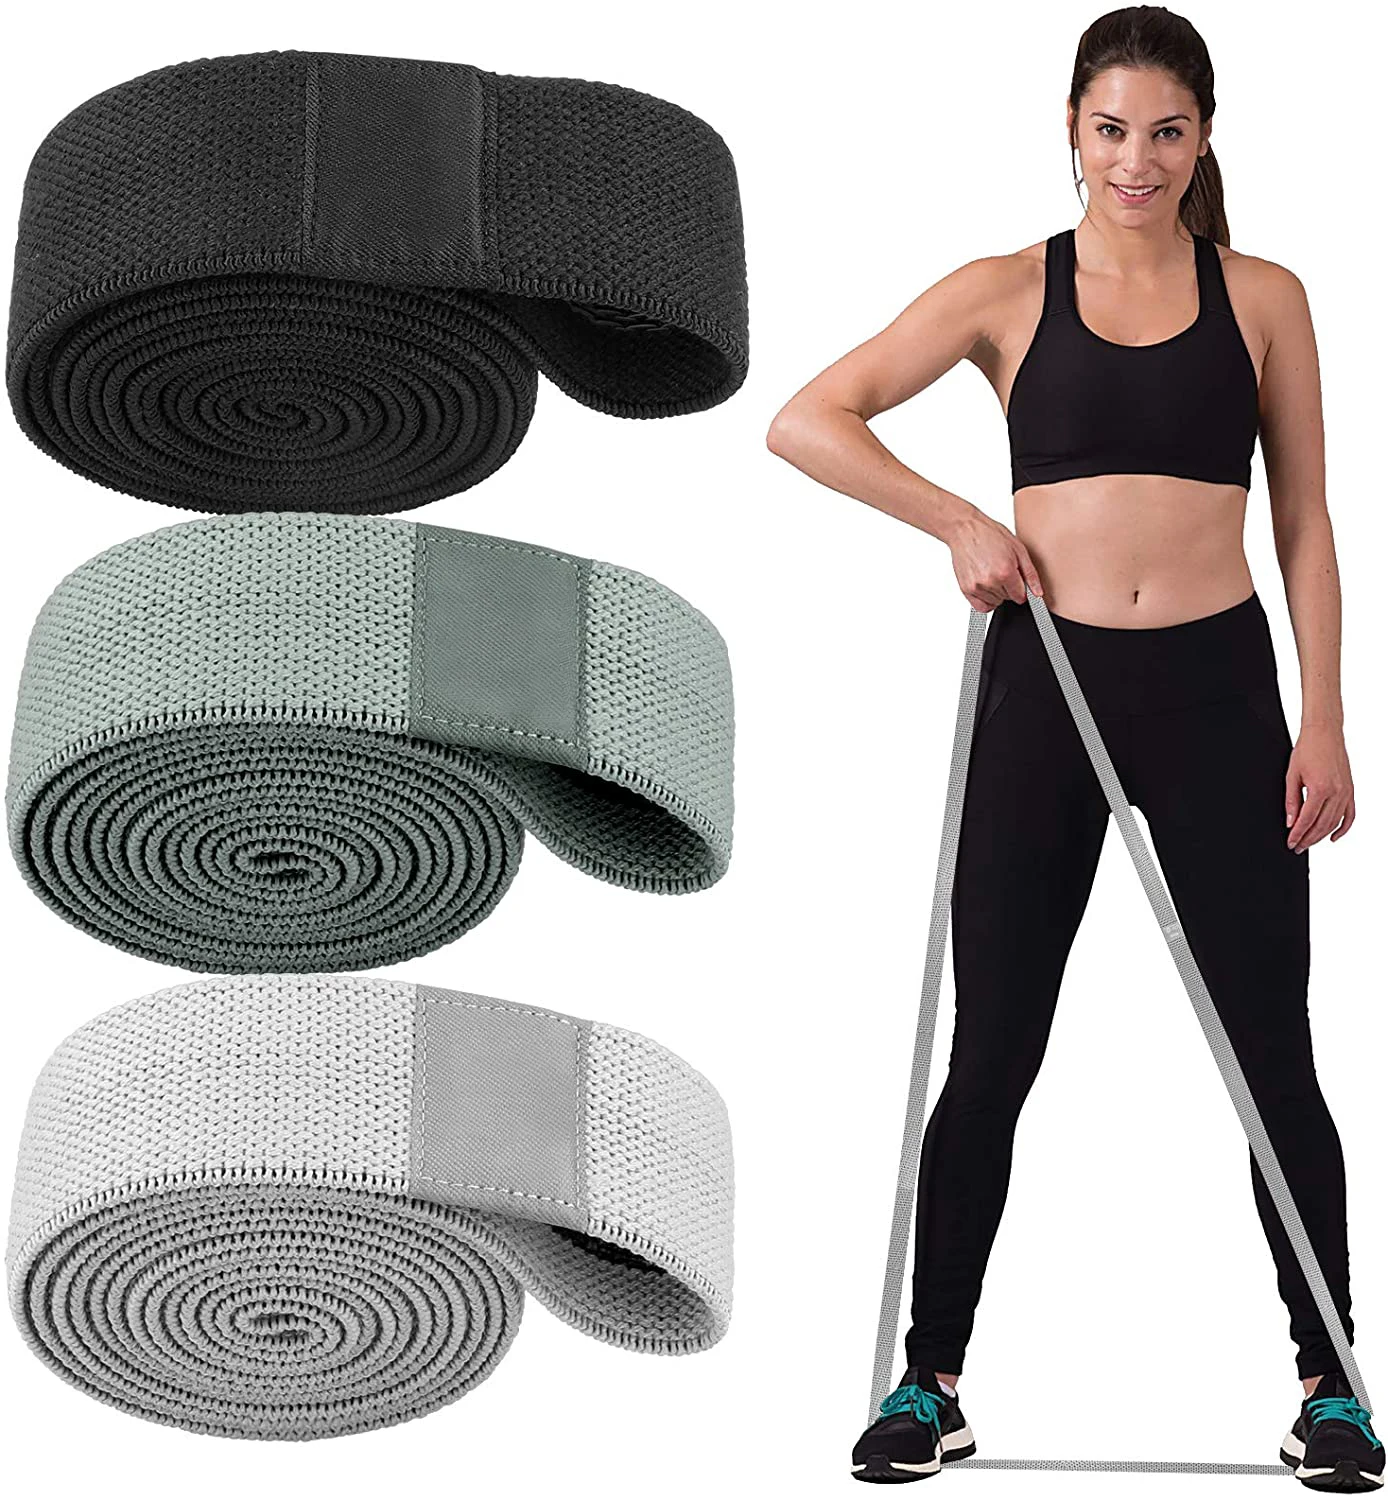 

SHIWEI-1011-11#Pull Up Assist 2M Fabric Long Resistance Bands Set loop bands set Workout Bands Resistance, As picture